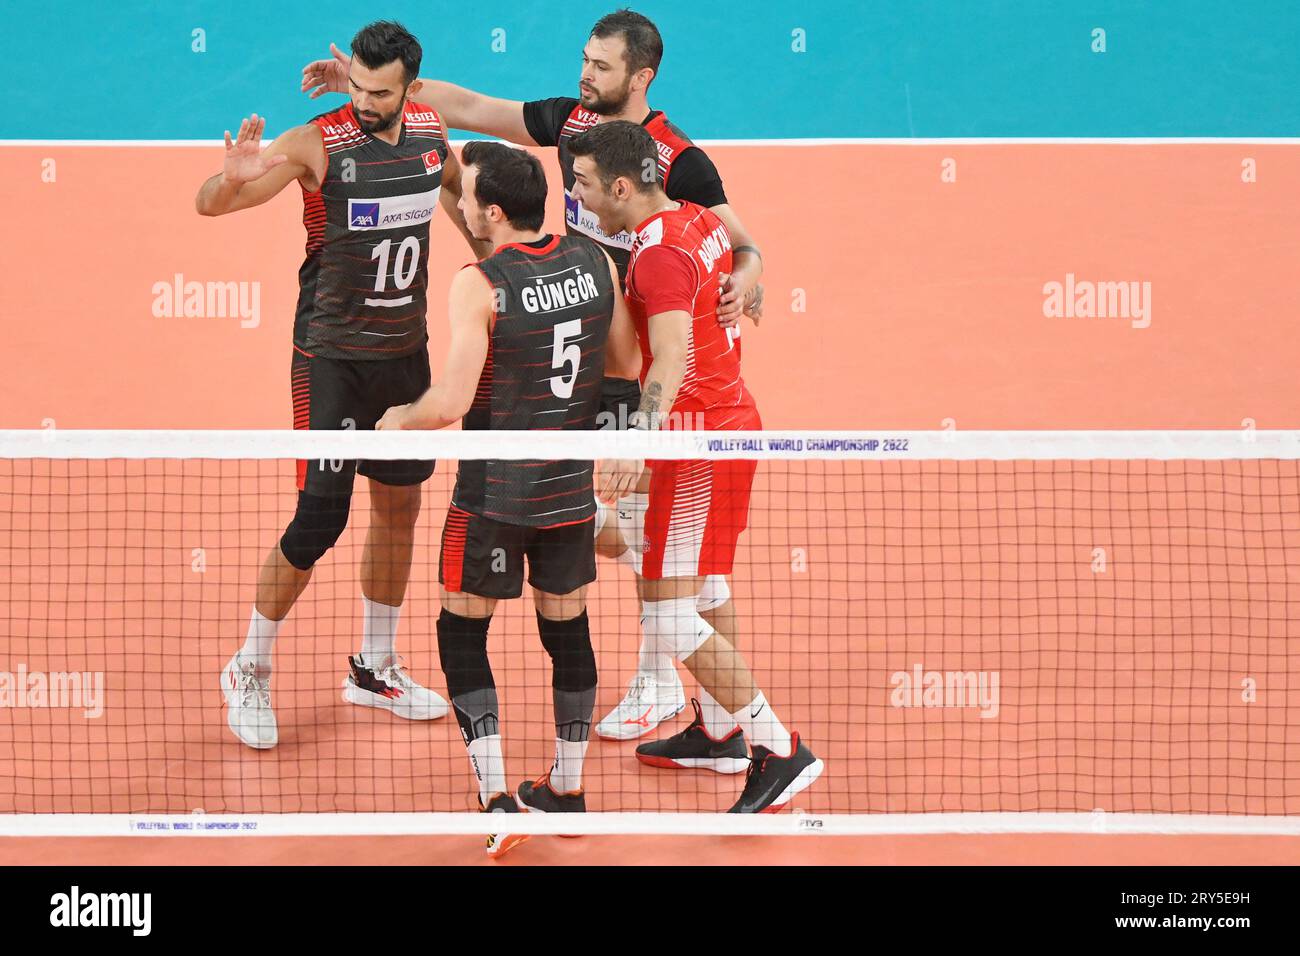 Turkey national team celebrating the win against Canada. Volleyball World  Championship 2022 Stock Photo - Alamy